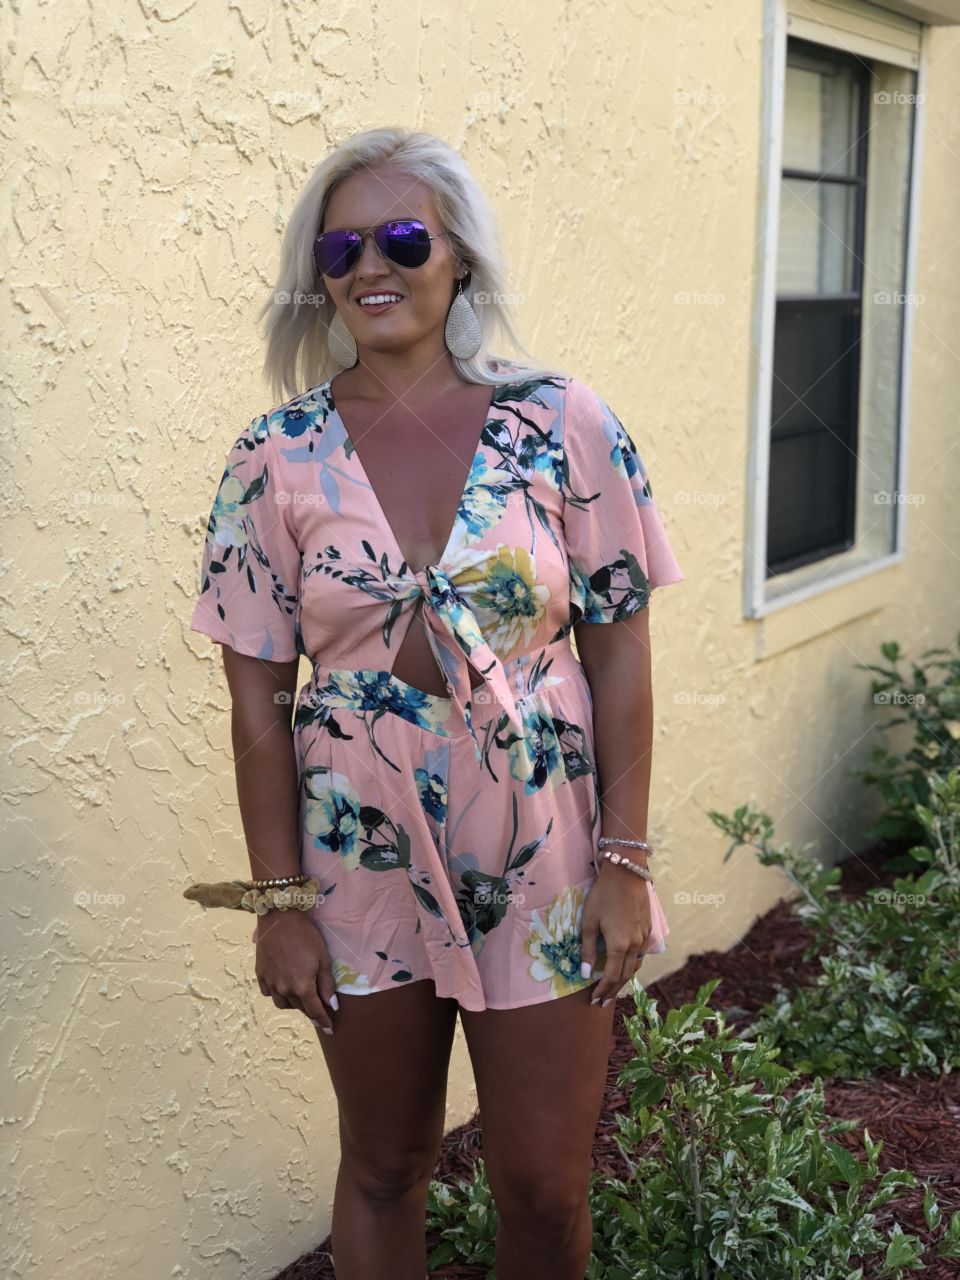 Blonde girl models sexy tropical print romper on vacation as she heads out to dinner in Florida 